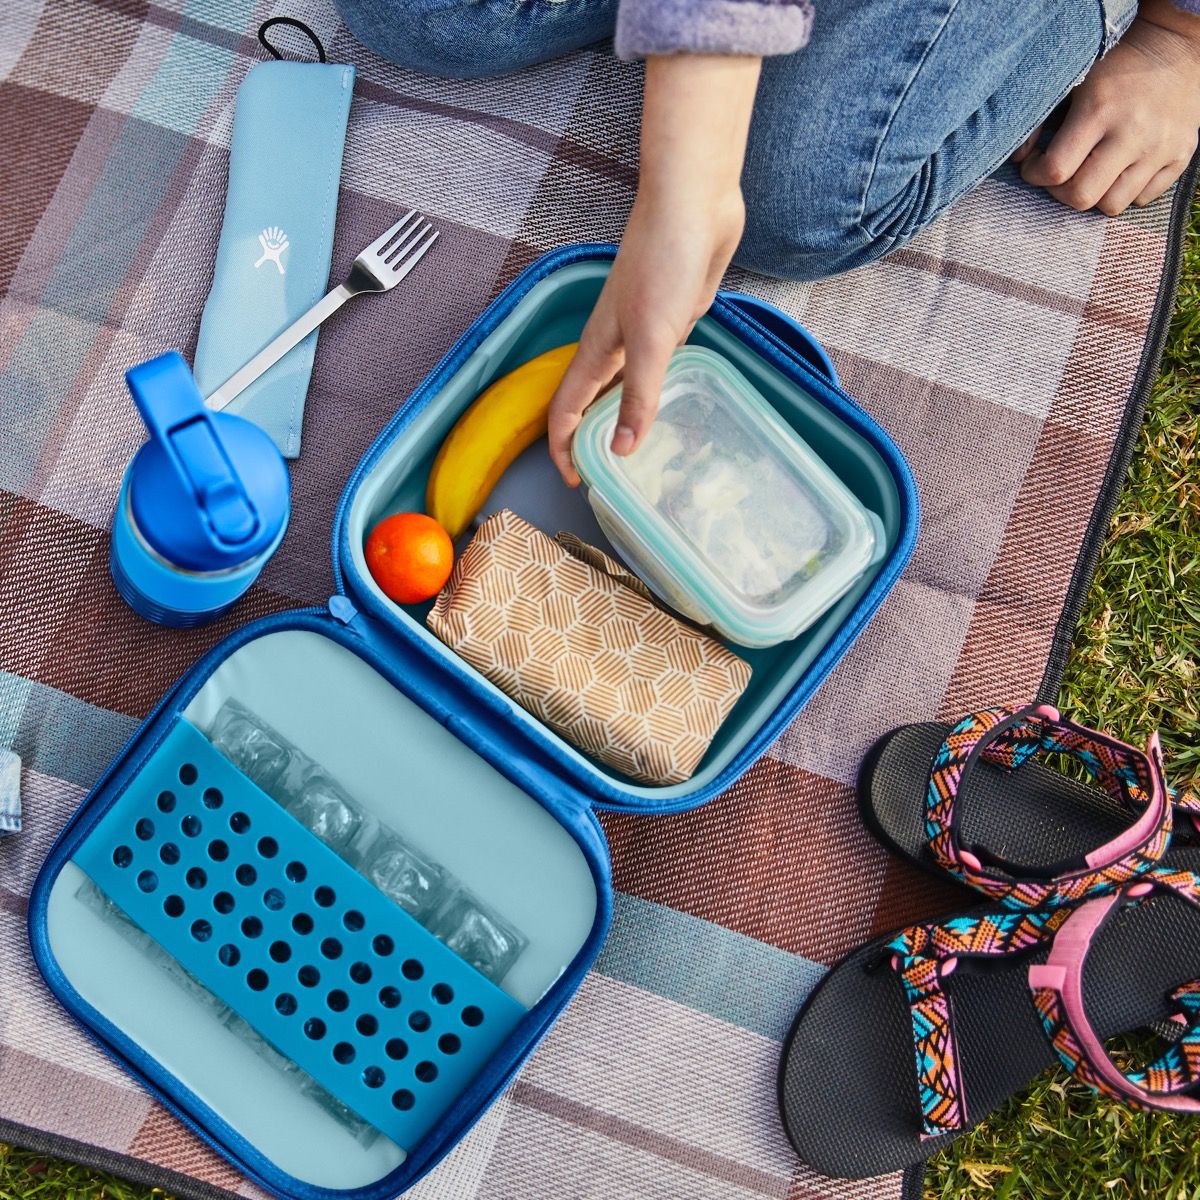 Hydro Flask Insulated Lunch Box - Small